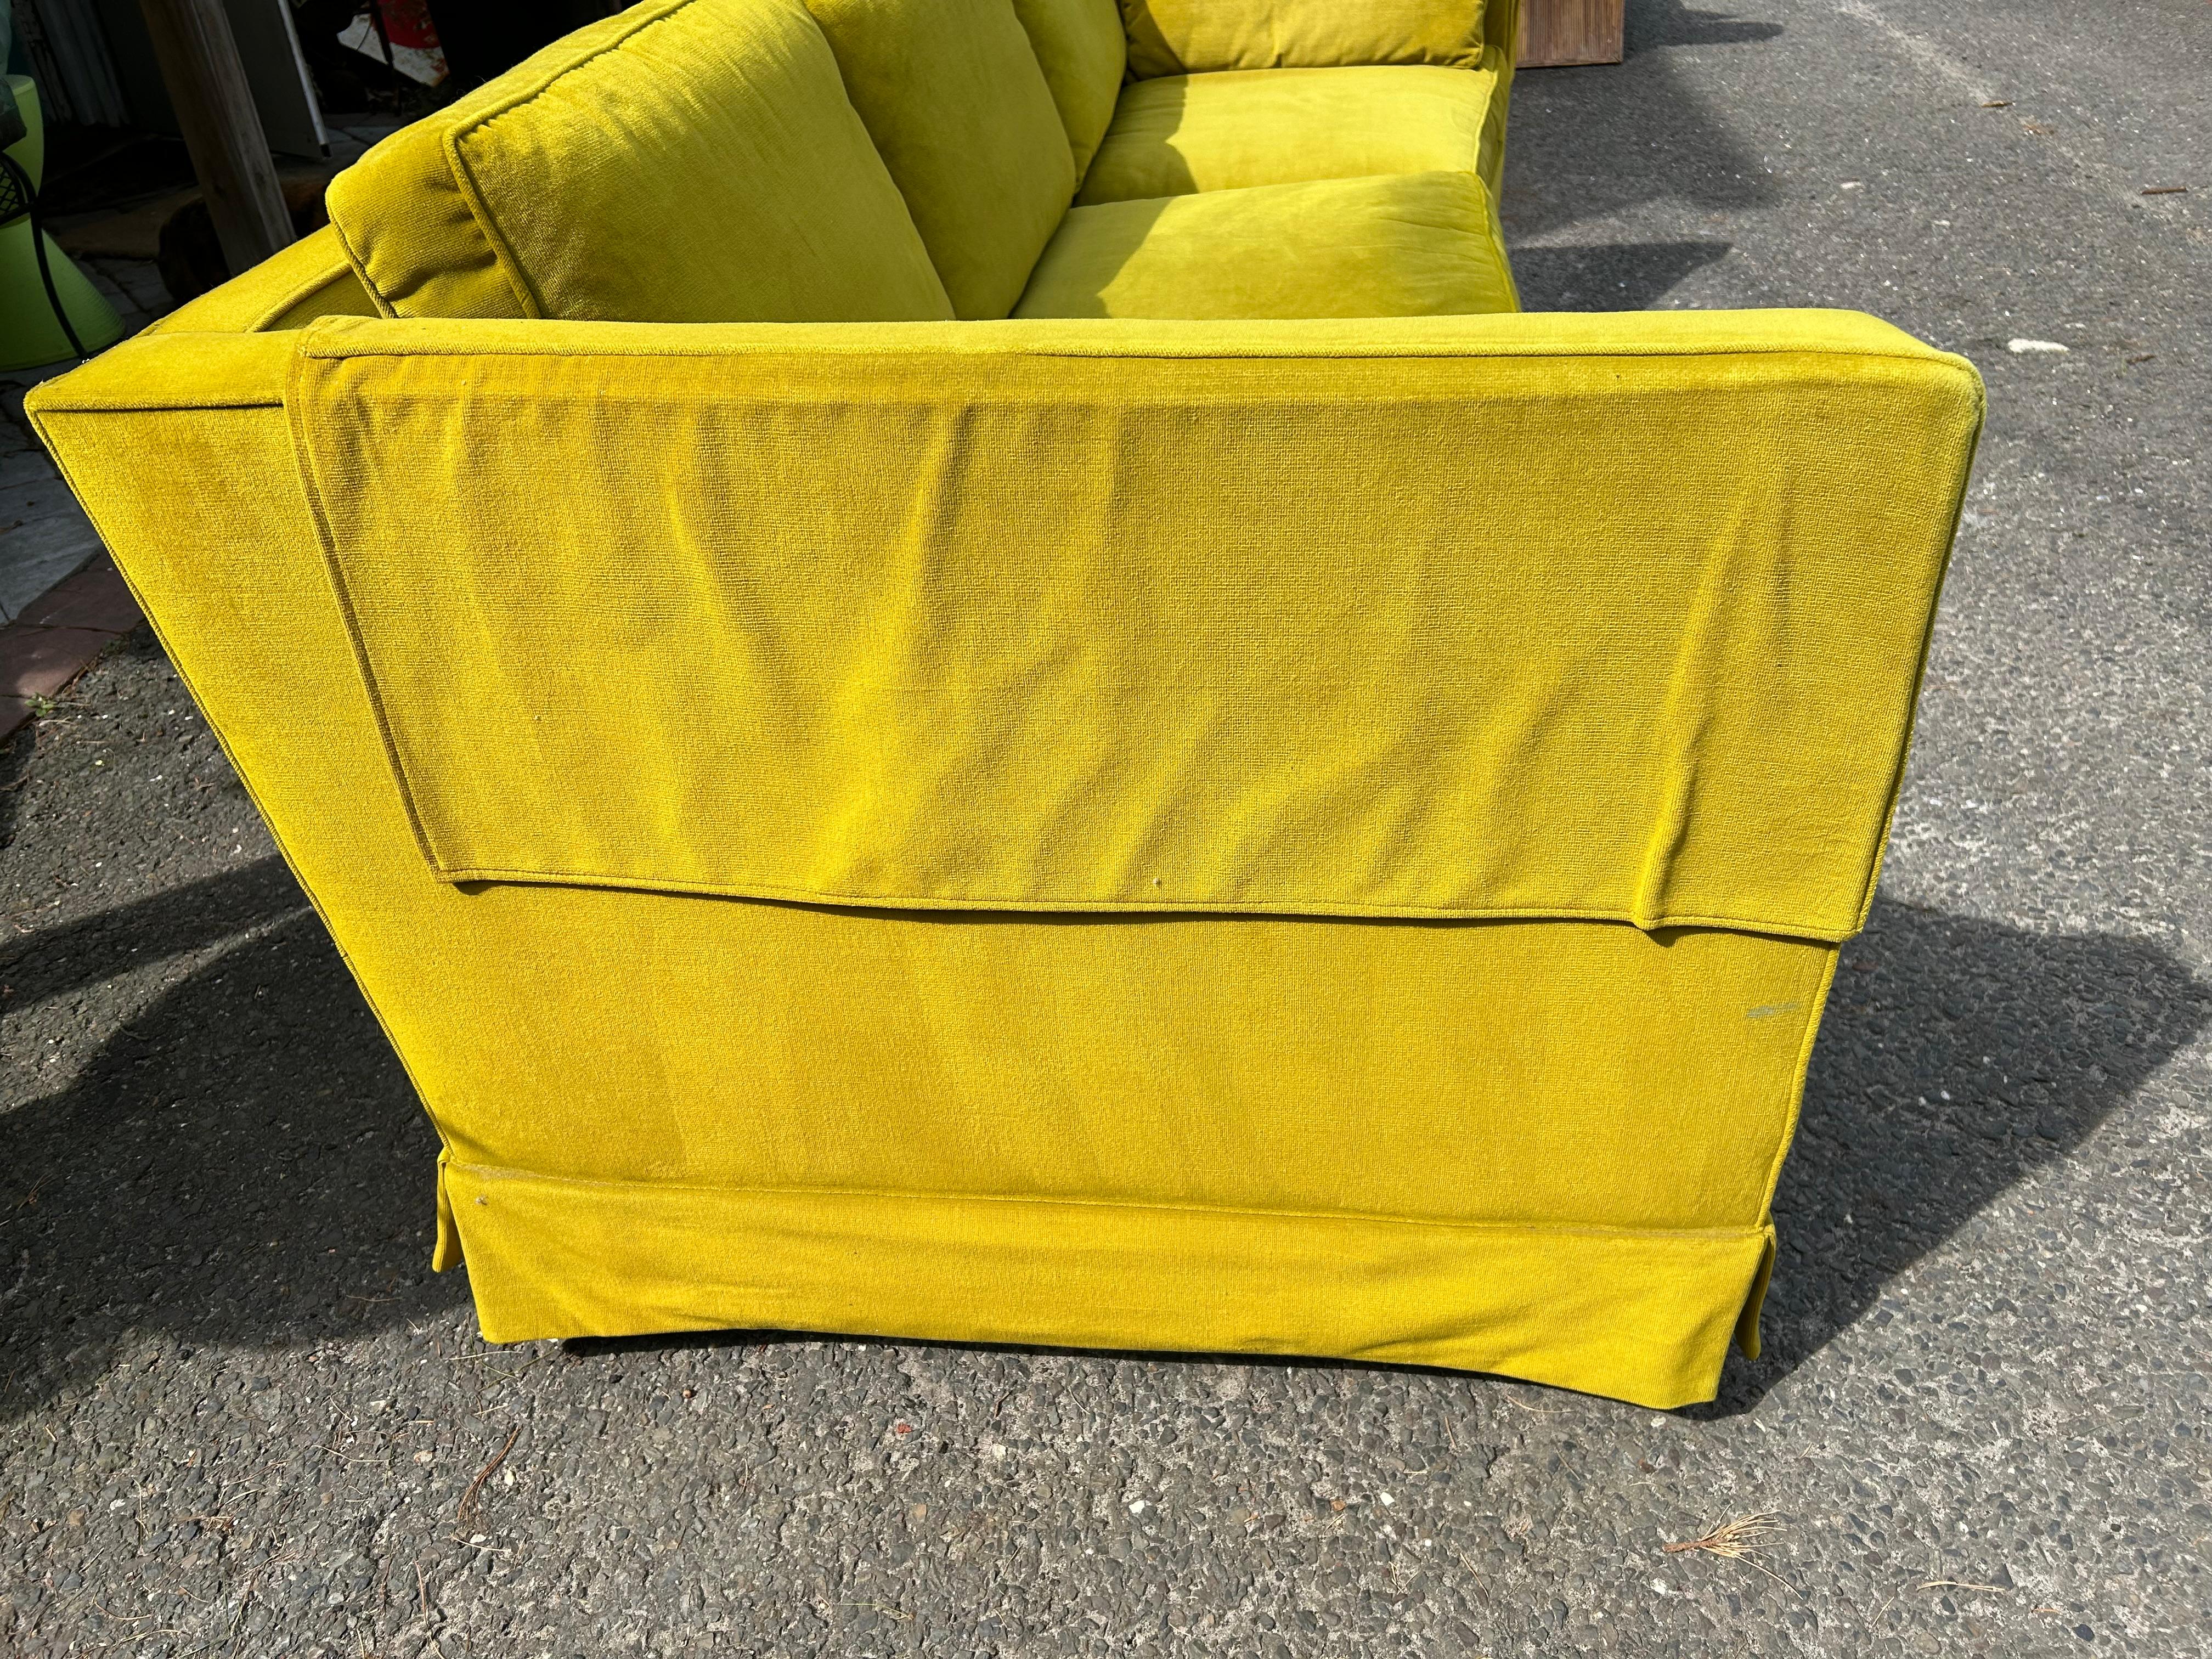 Spectacular Curved Harvey Probber Even Arm Sofa Chartreus Mid-century Modern  In Good Condition For Sale In Pemberton, NJ